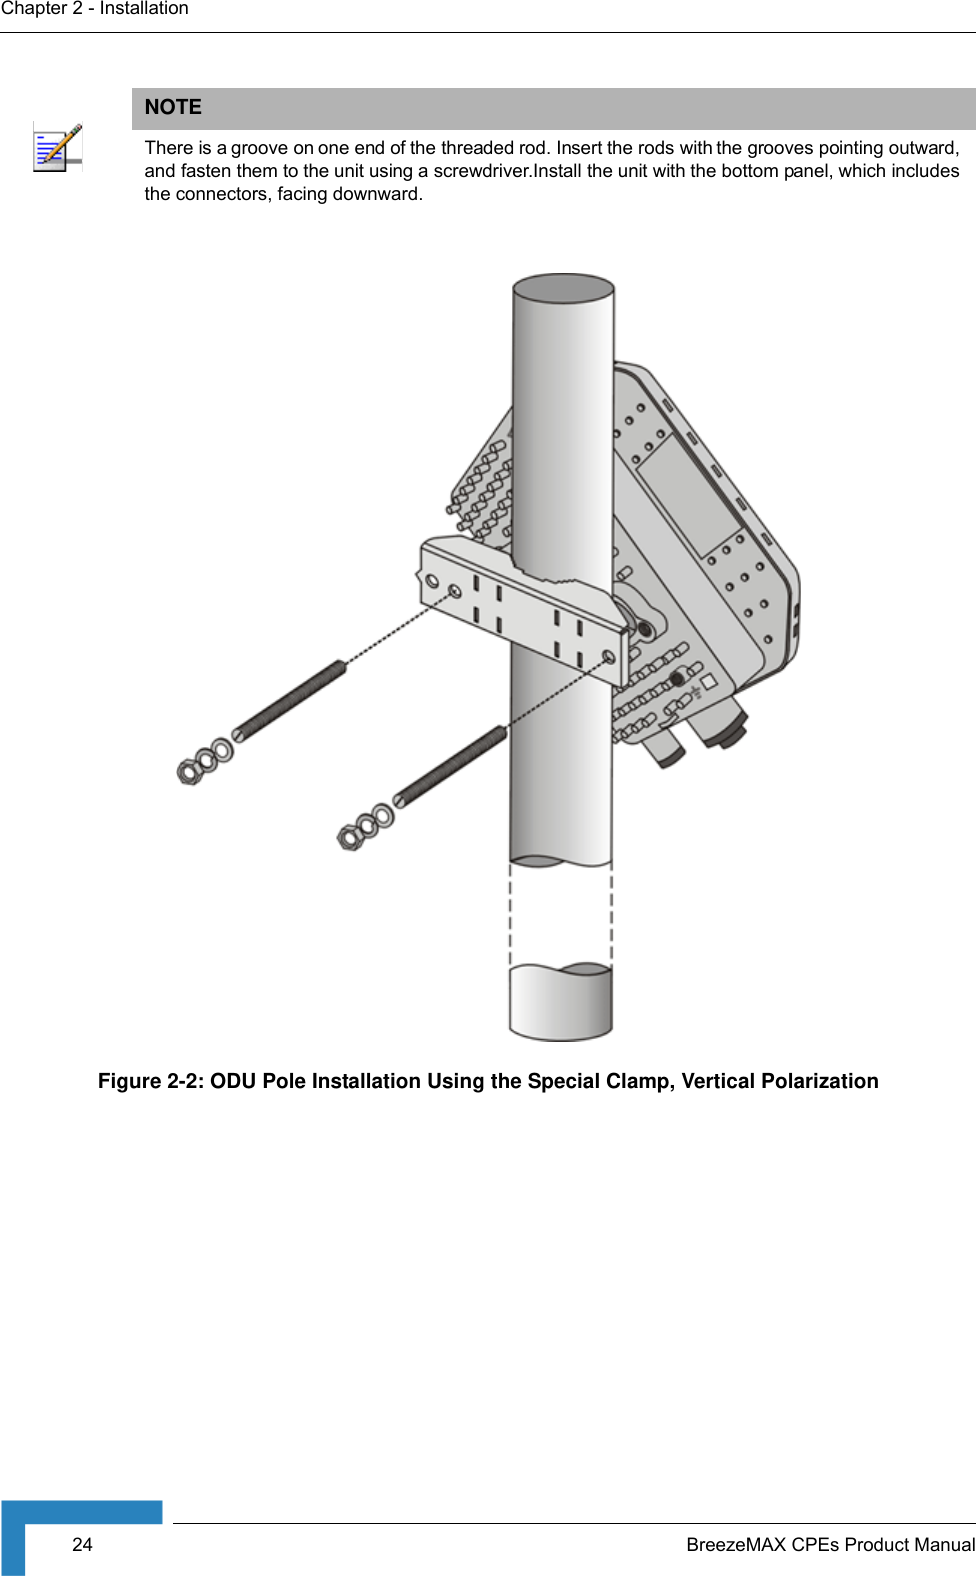 24 BreezeMAX CPEs Product ManualChapter 2 - InstallationNOTEThere is a groove on one end of the threaded rod. Insert the rods with the grooves pointing outward, and fasten them to the unit using a screwdriver.Install the unit with the bottom panel, which includes the connectors, facing downward.Figure 2-2: ODU Pole Installation Using the Special Clamp, Vertical Polarization